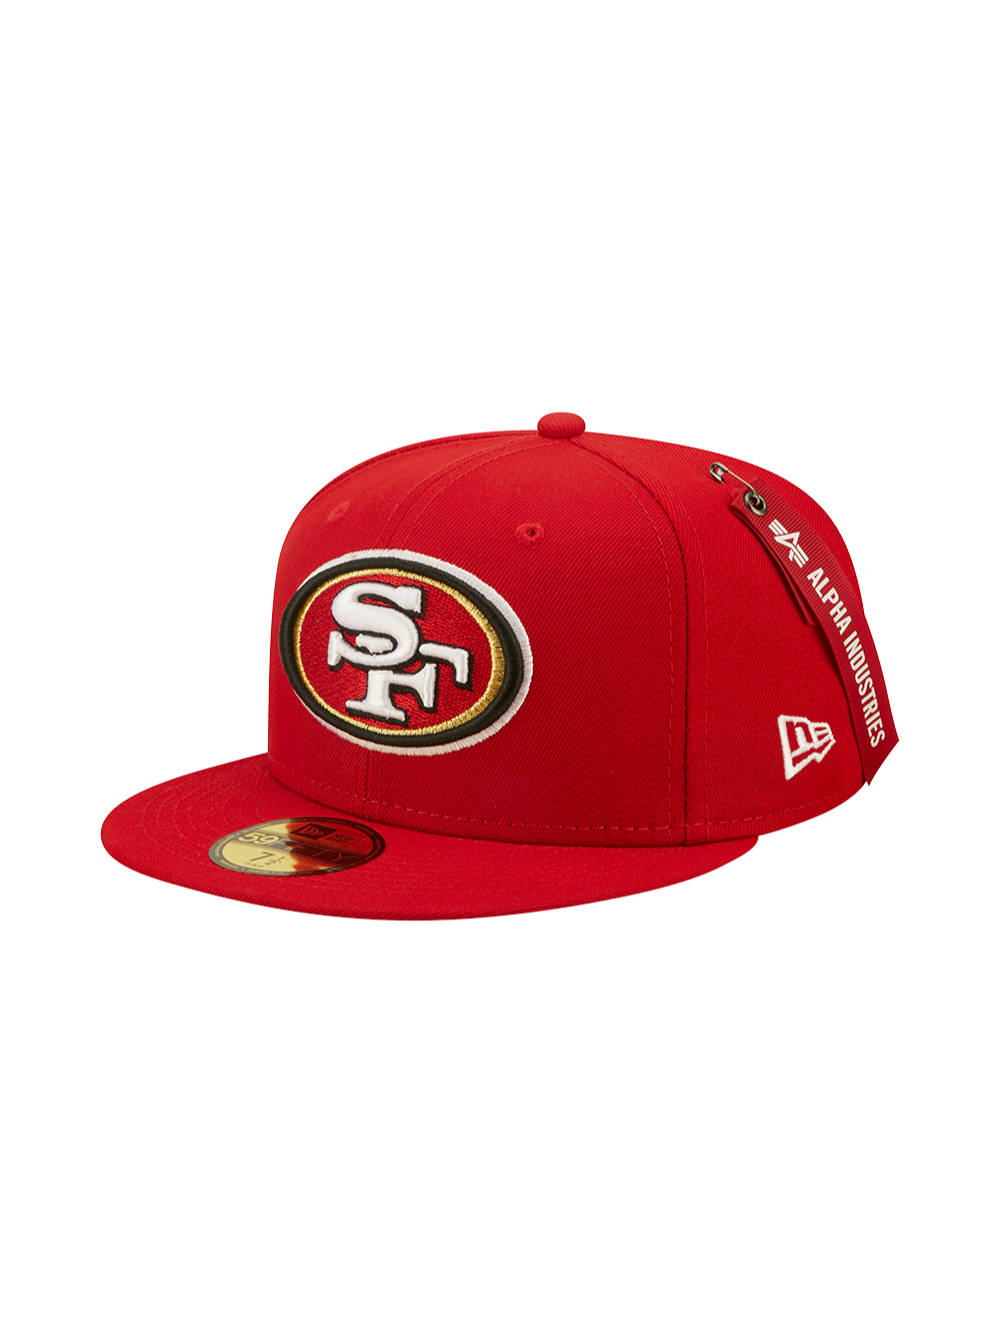 SAN FRANCISCO 49ERS X ALPHA X NEW ERA 59FIFTY FITTED CAP ACCESSORY Alpha Industries RED 7 